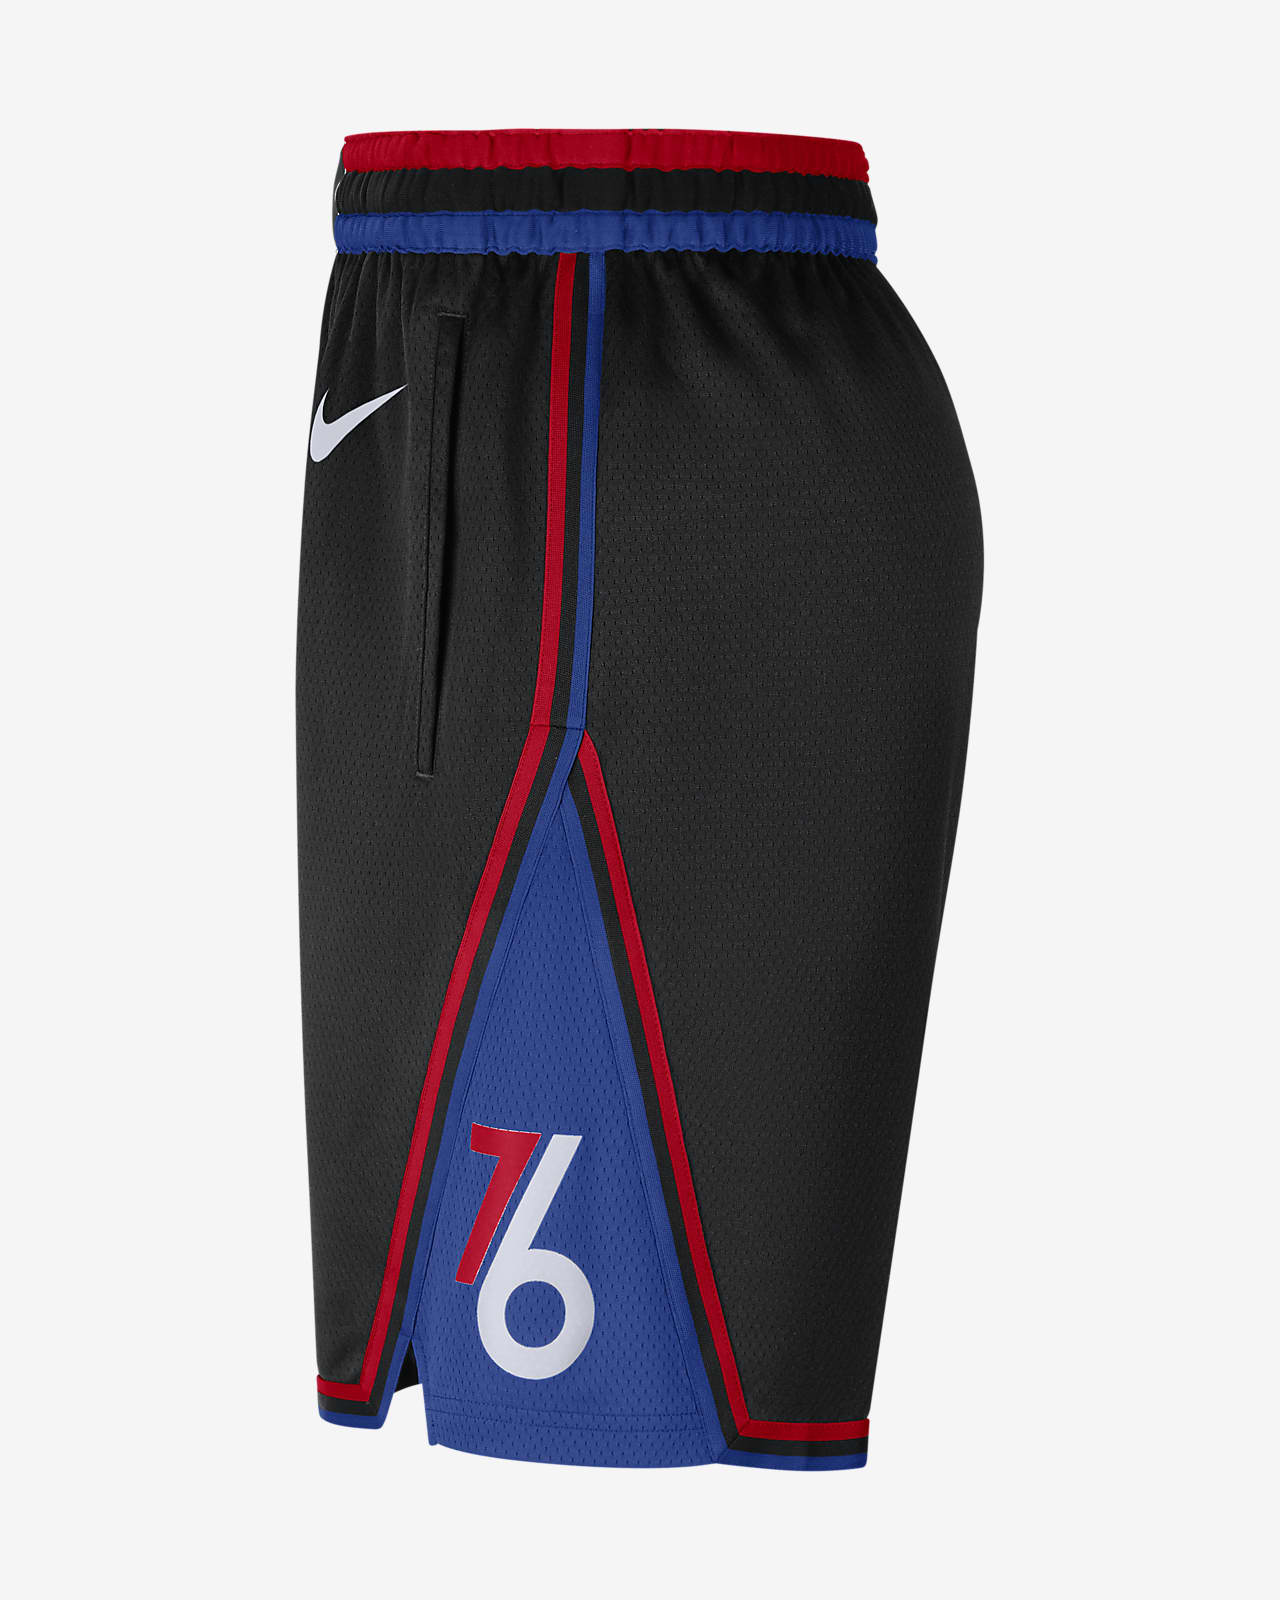 76ers shorts city edition